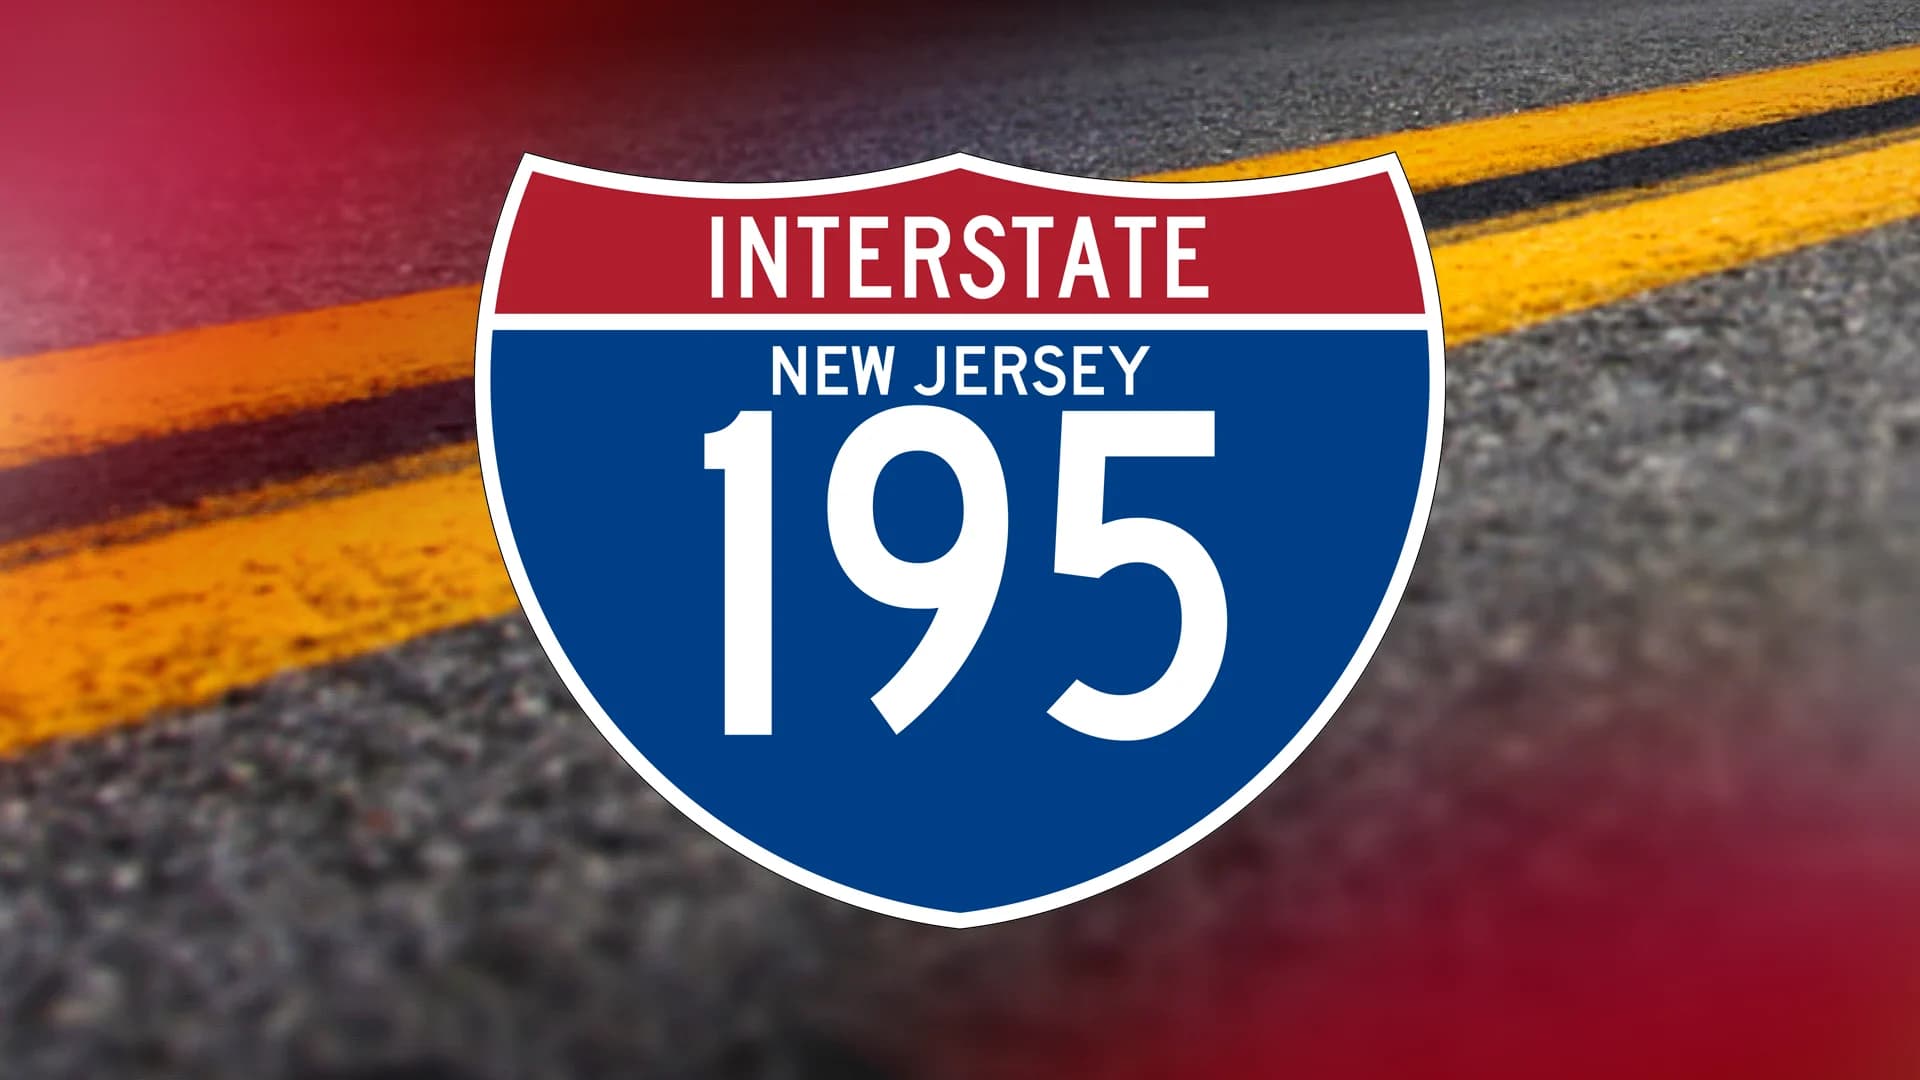 State police: Woman killed in Thursday morning crash on I-195